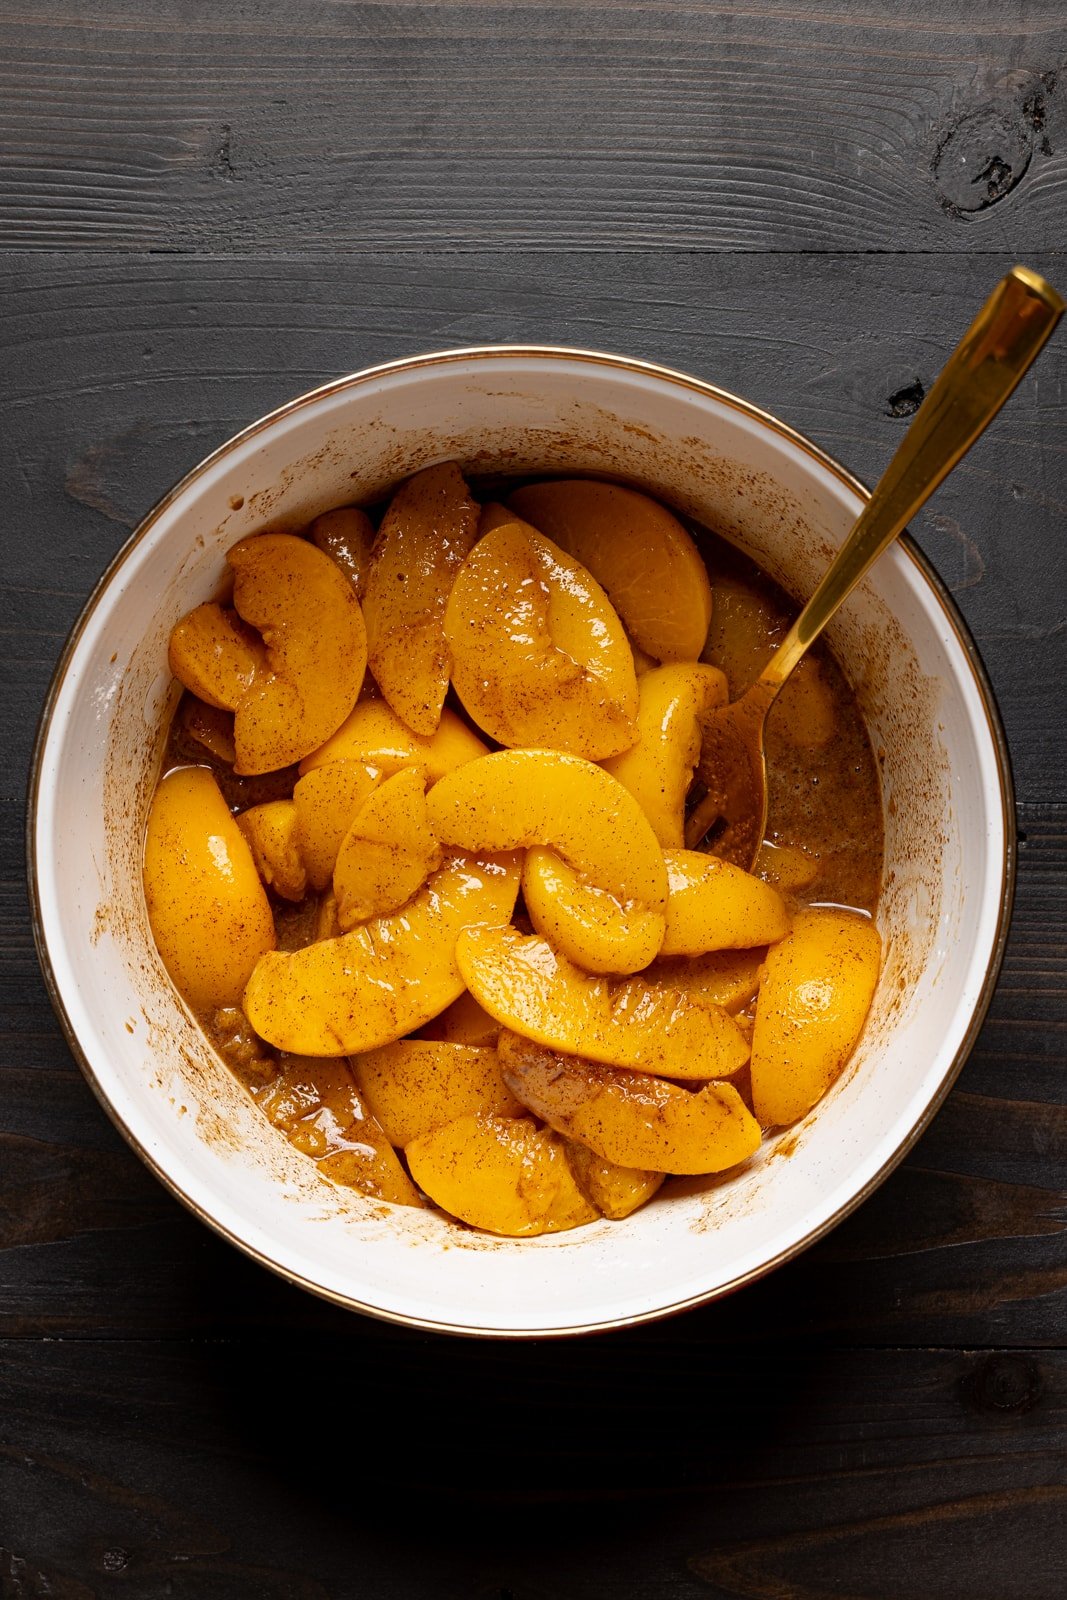 Peaches mixed together with spices and ingredients in a bowl.